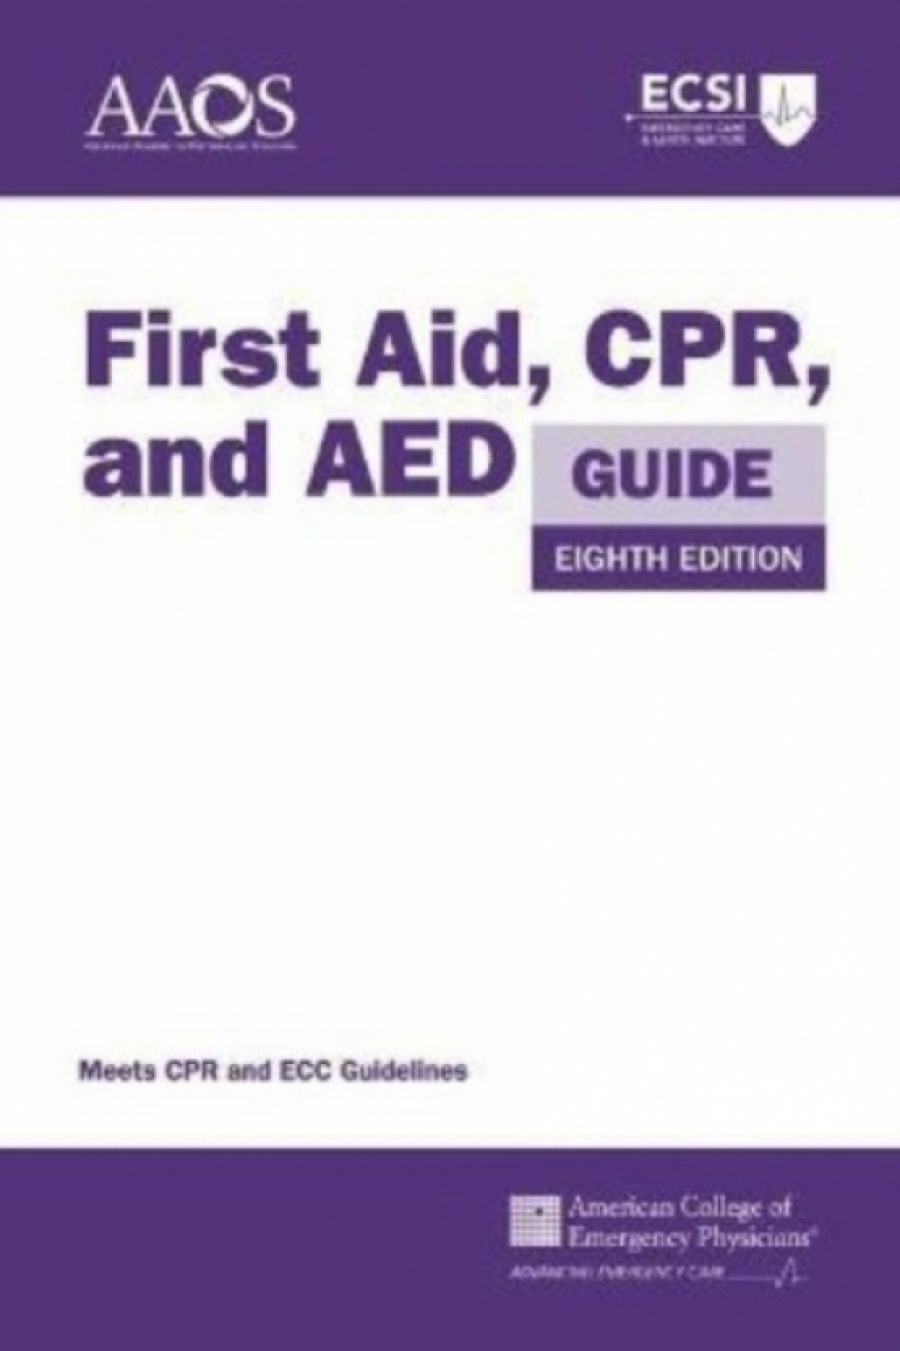 American, American Academy of Orthopaedic Surgeons First Aid, Cpr, and AED Guide 